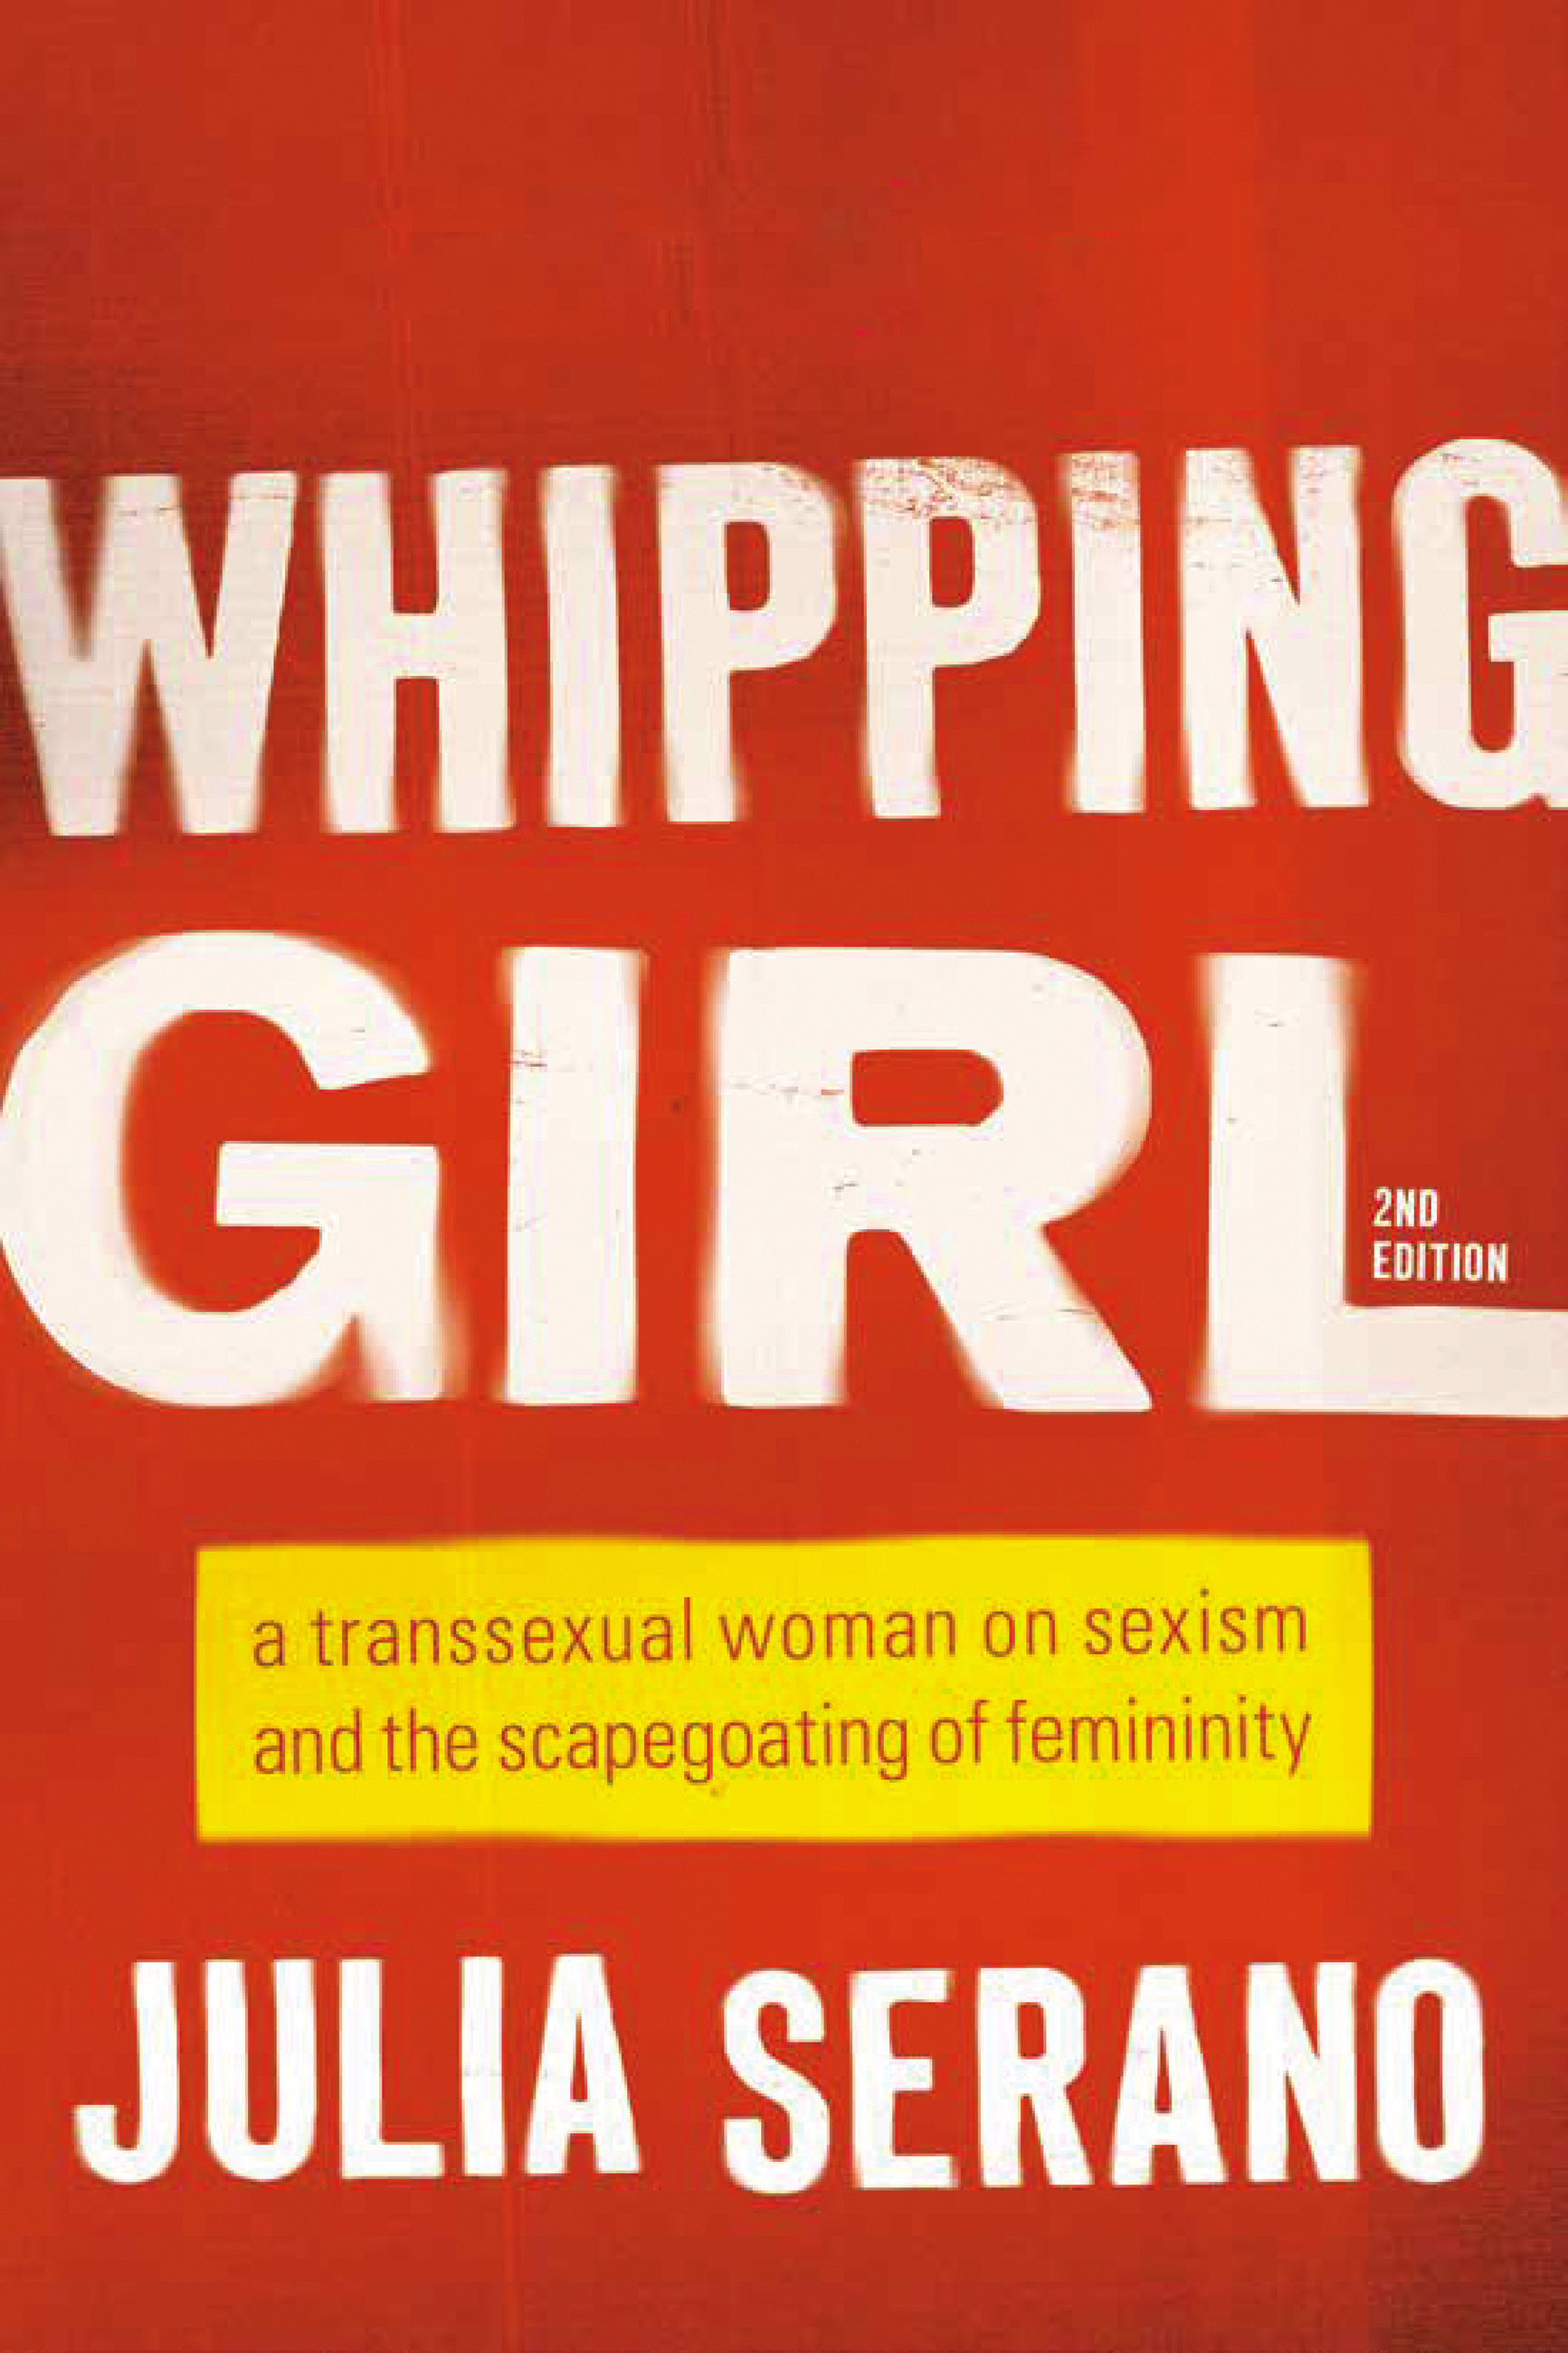 Shemale On Boy - Whipping Girl by Julia Serano | Hachette Book Group